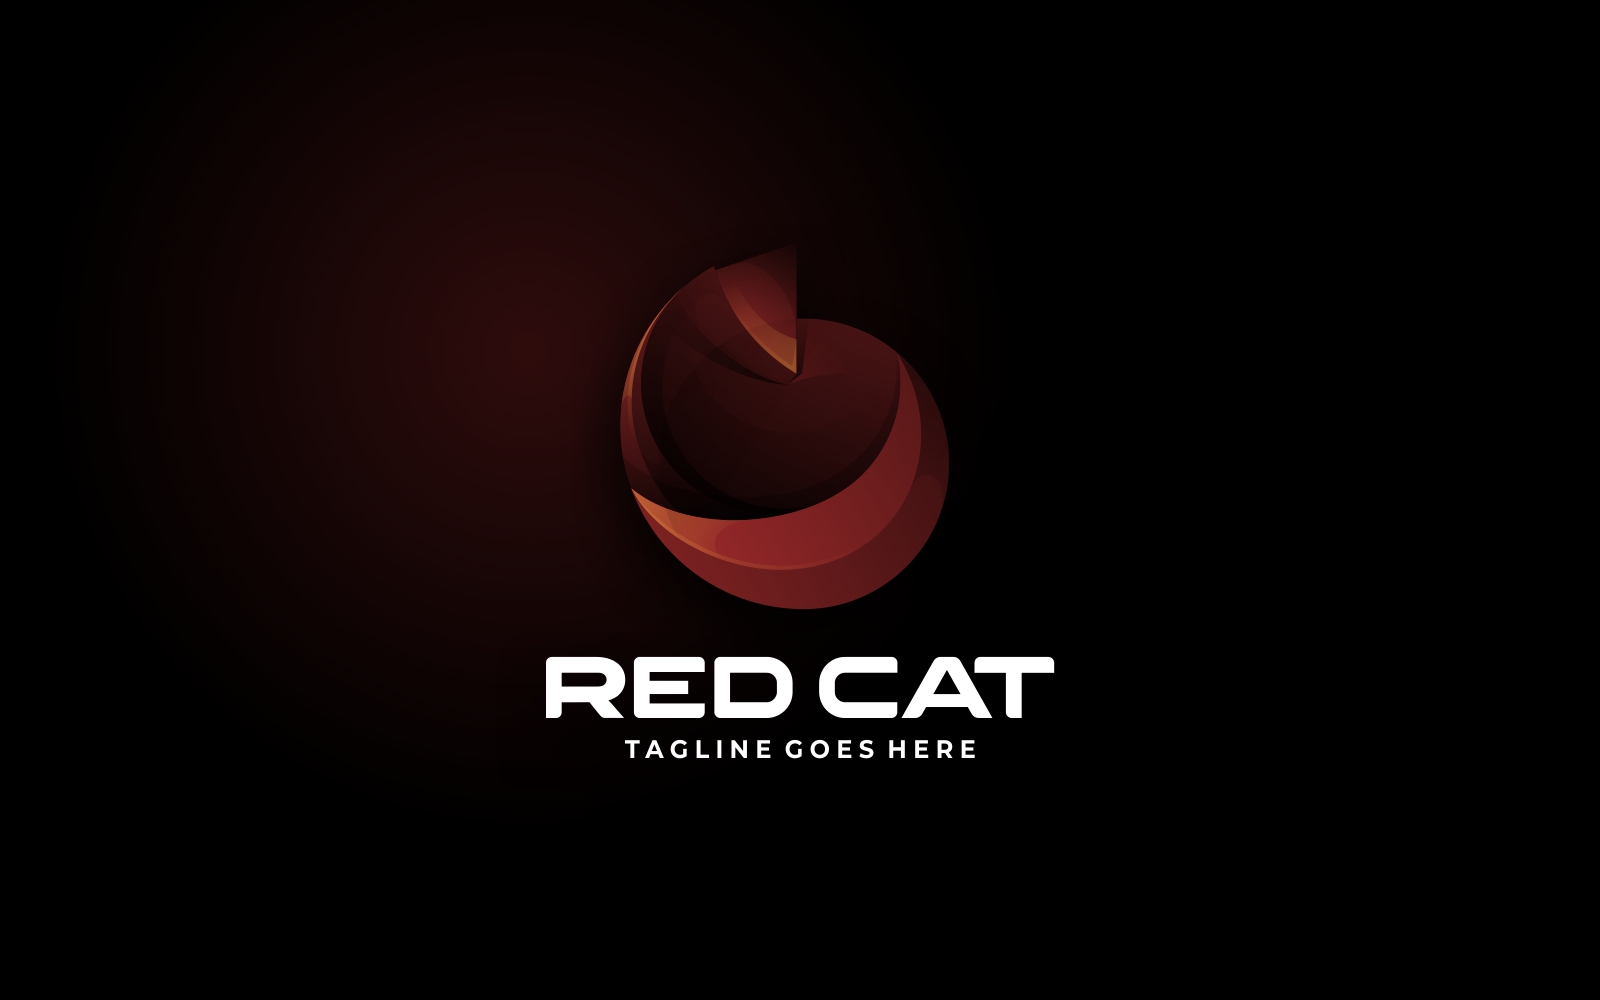 Red Cat Gradient Logo Style